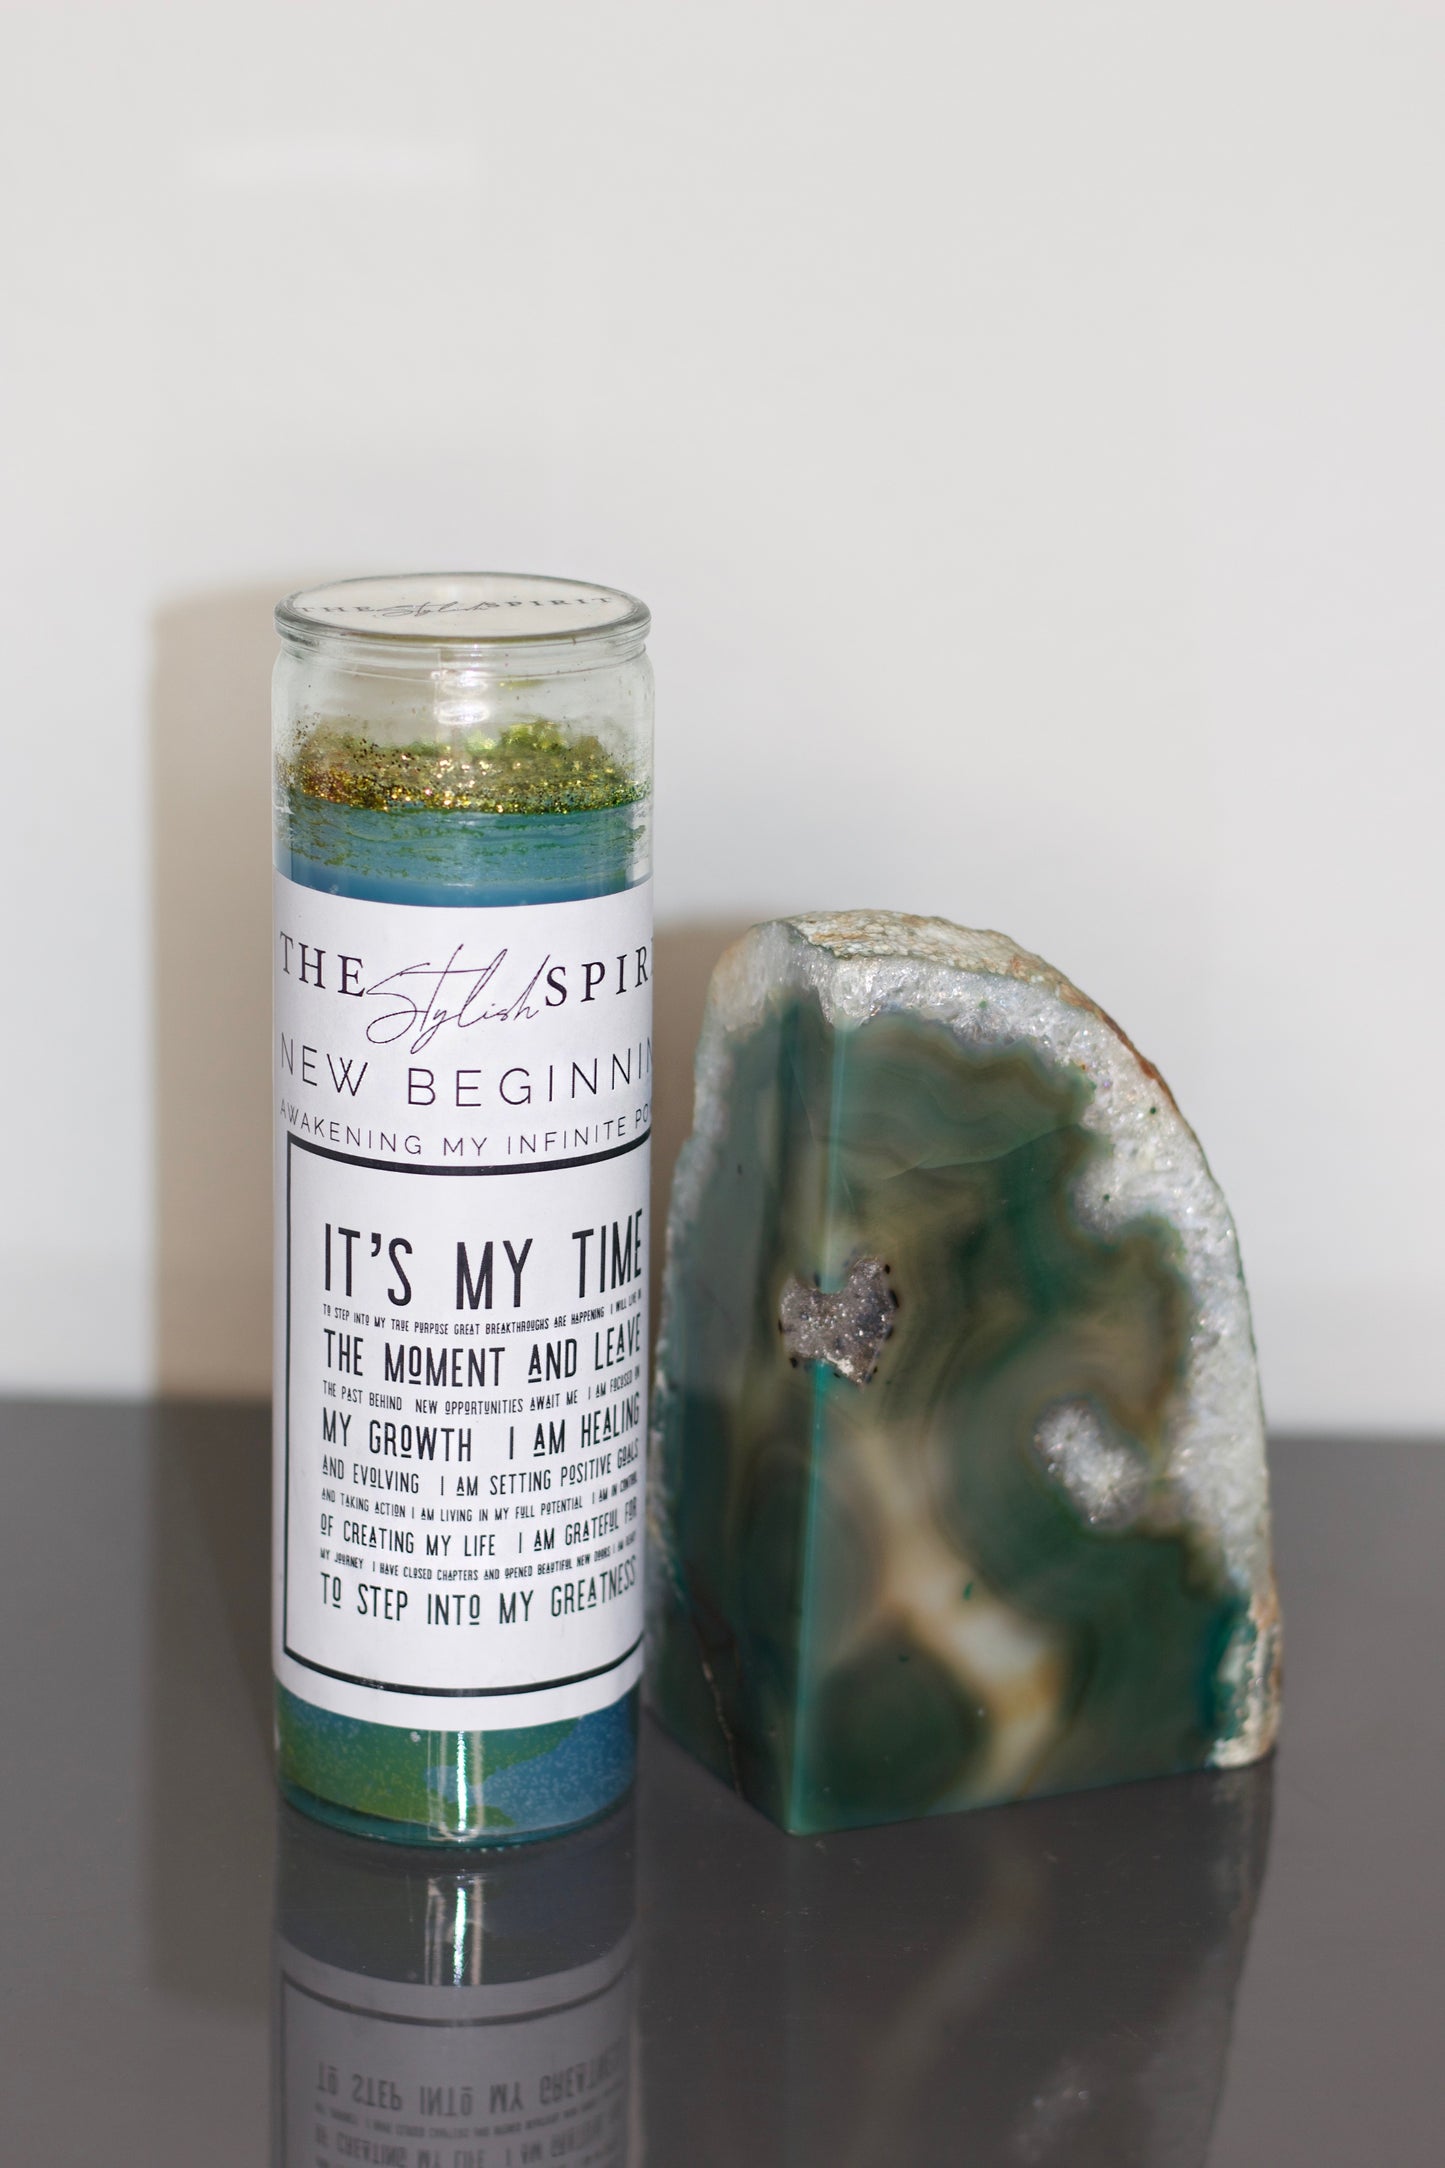 NEW BEGINNING INTENTION CANDLE